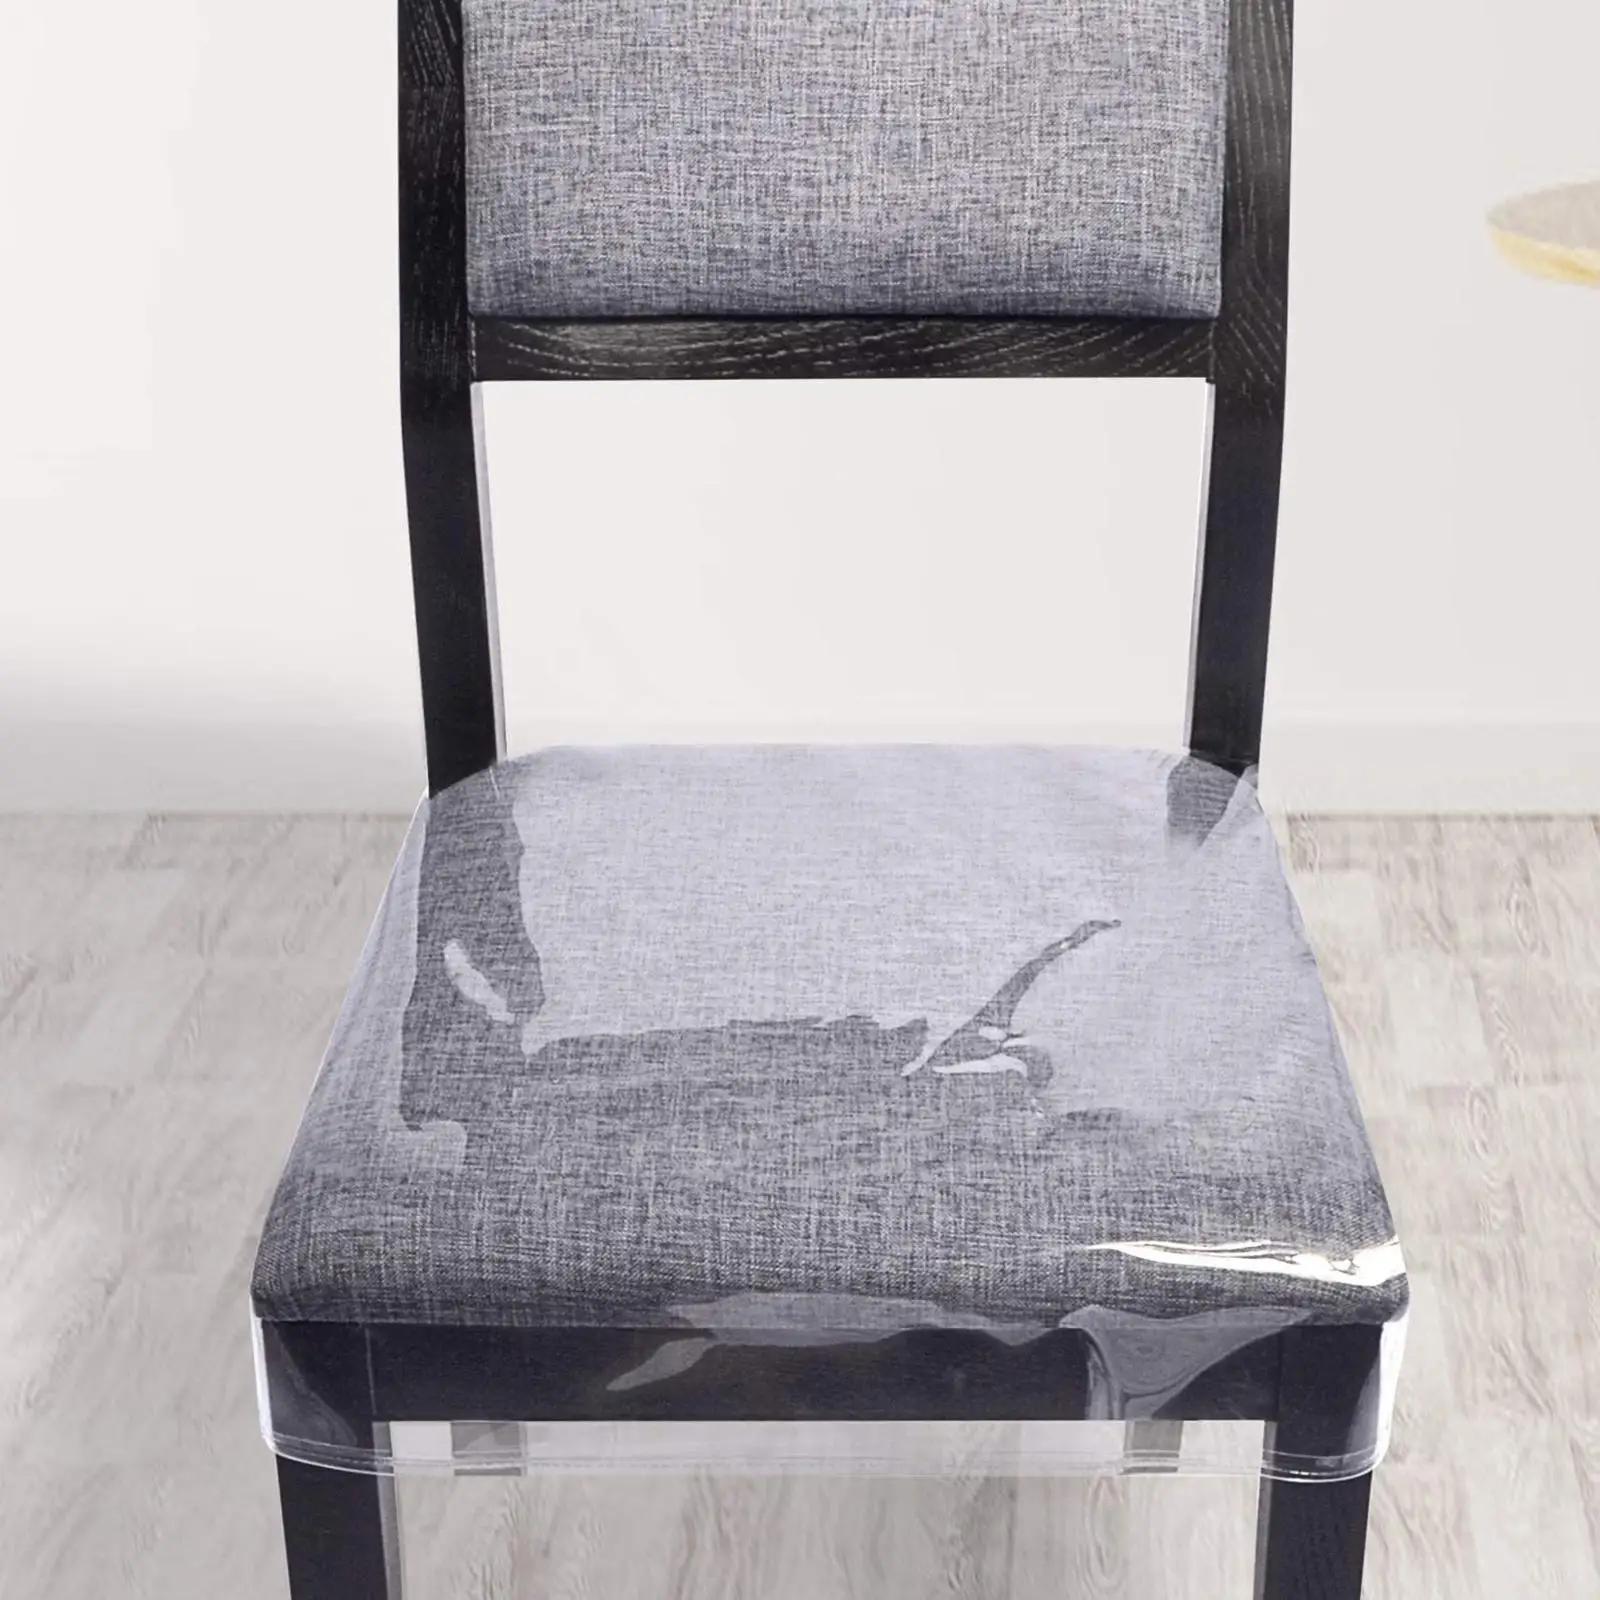 Clear Dining Chair Cover Waterproof with Strap Scratch Resistant Chair Cover for Dining Room Kids Seat Slipcover Chair Slipcover